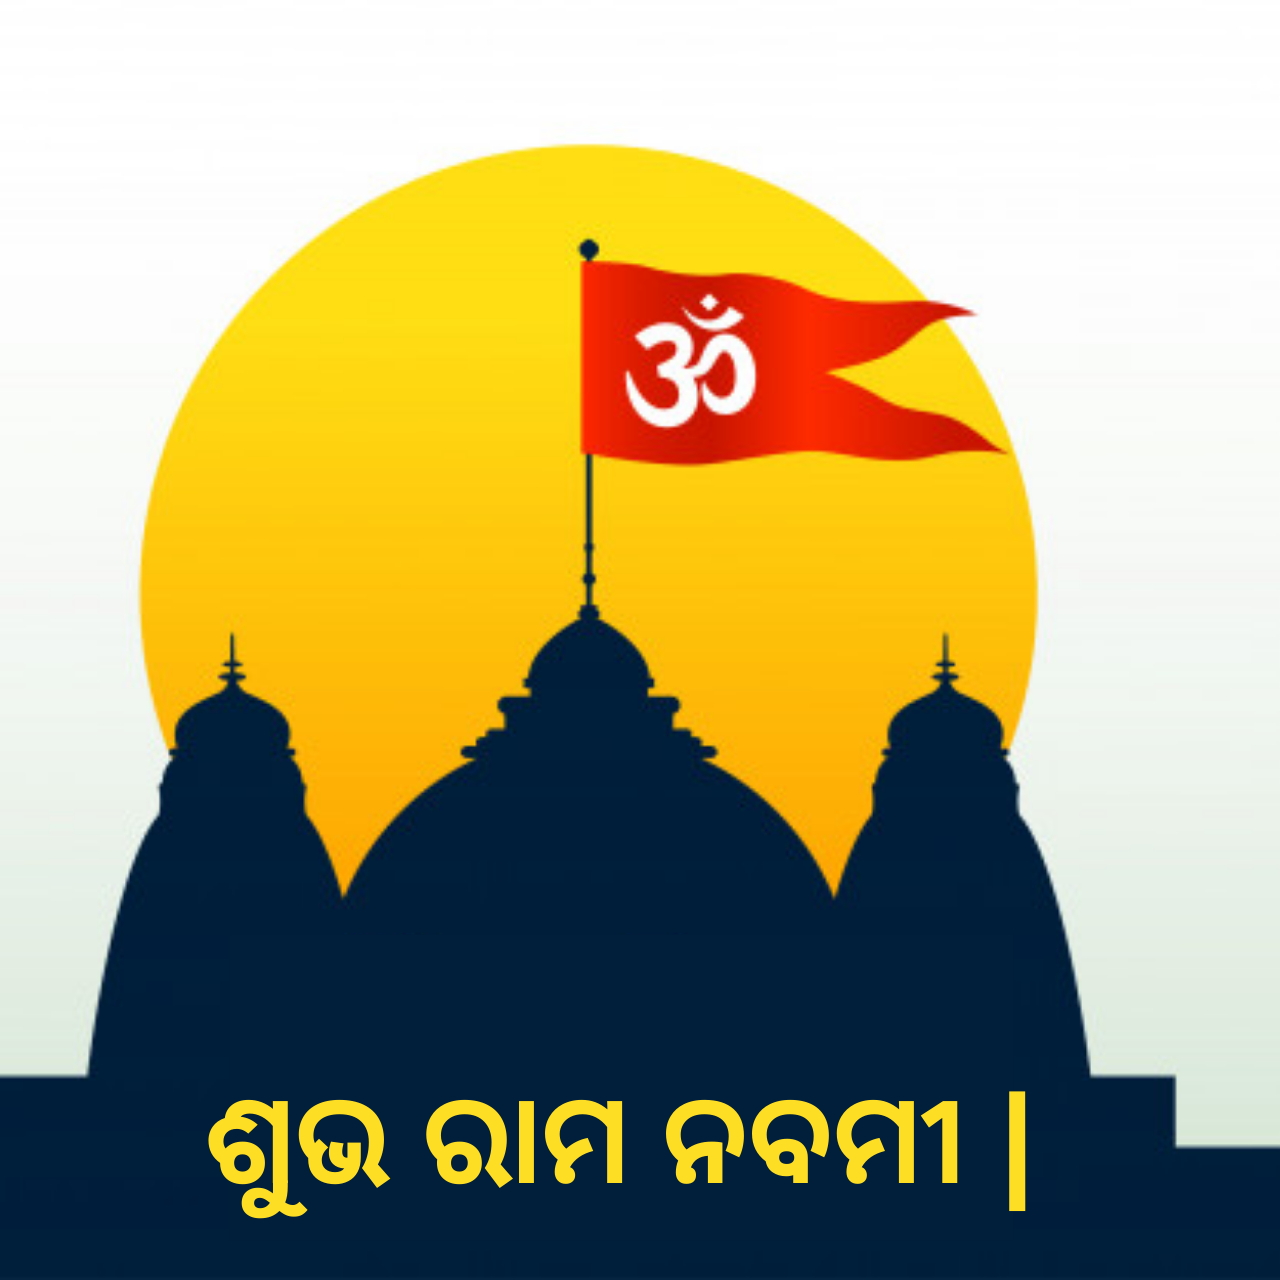 Happy Ram Navami 2021 Wishes in Odia, Images, Greetings, Messages, and Quotes to Share